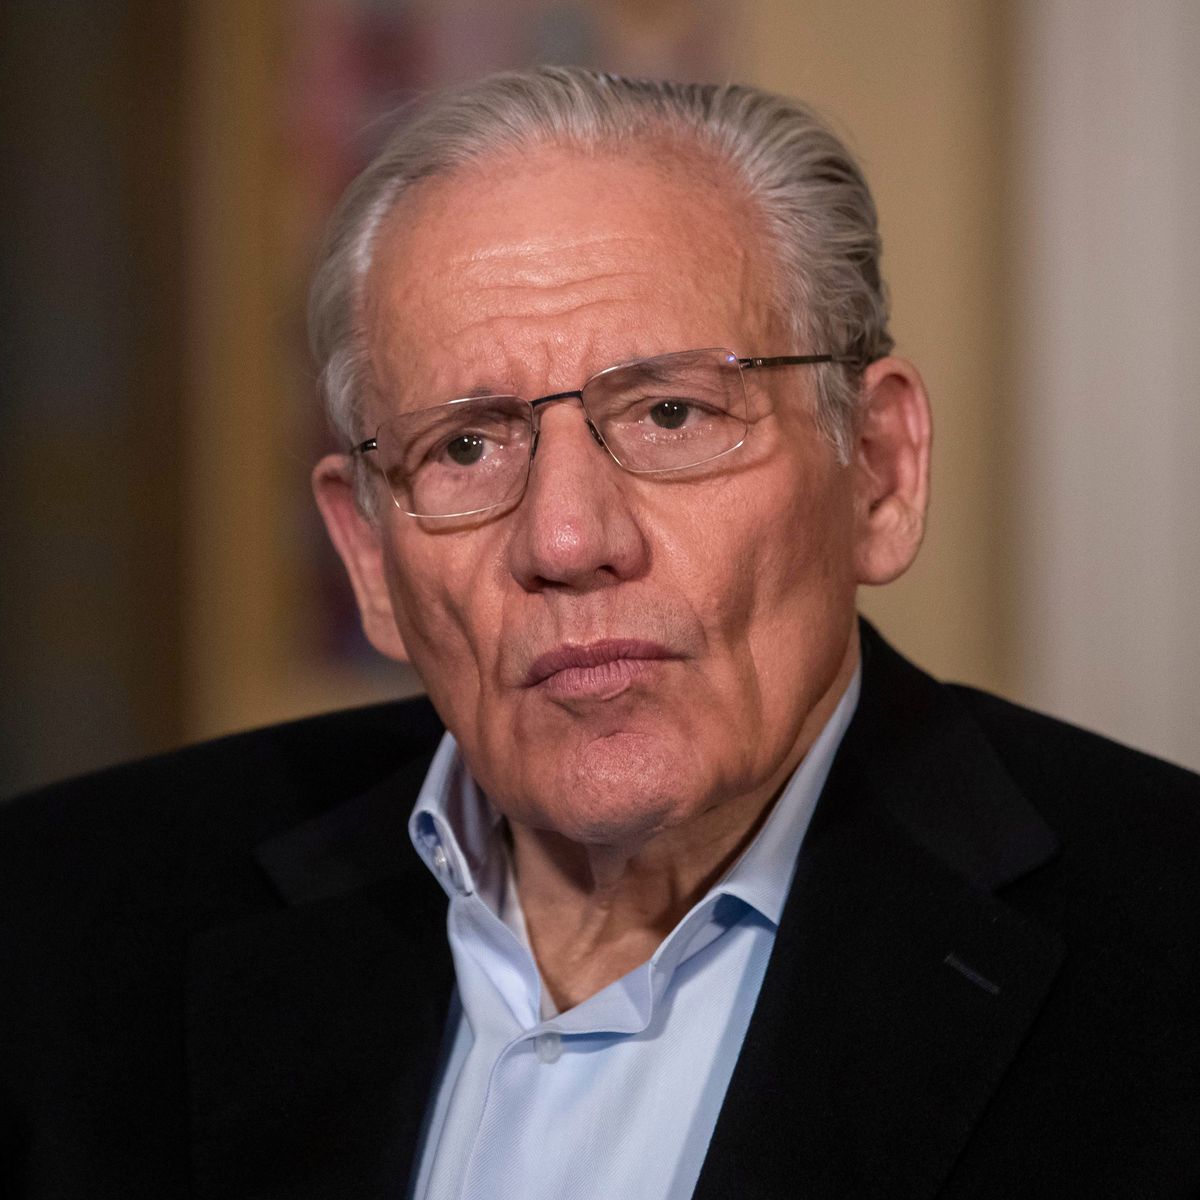 The 5 Wildest Revelations in Bob Woodward's New Trump Book